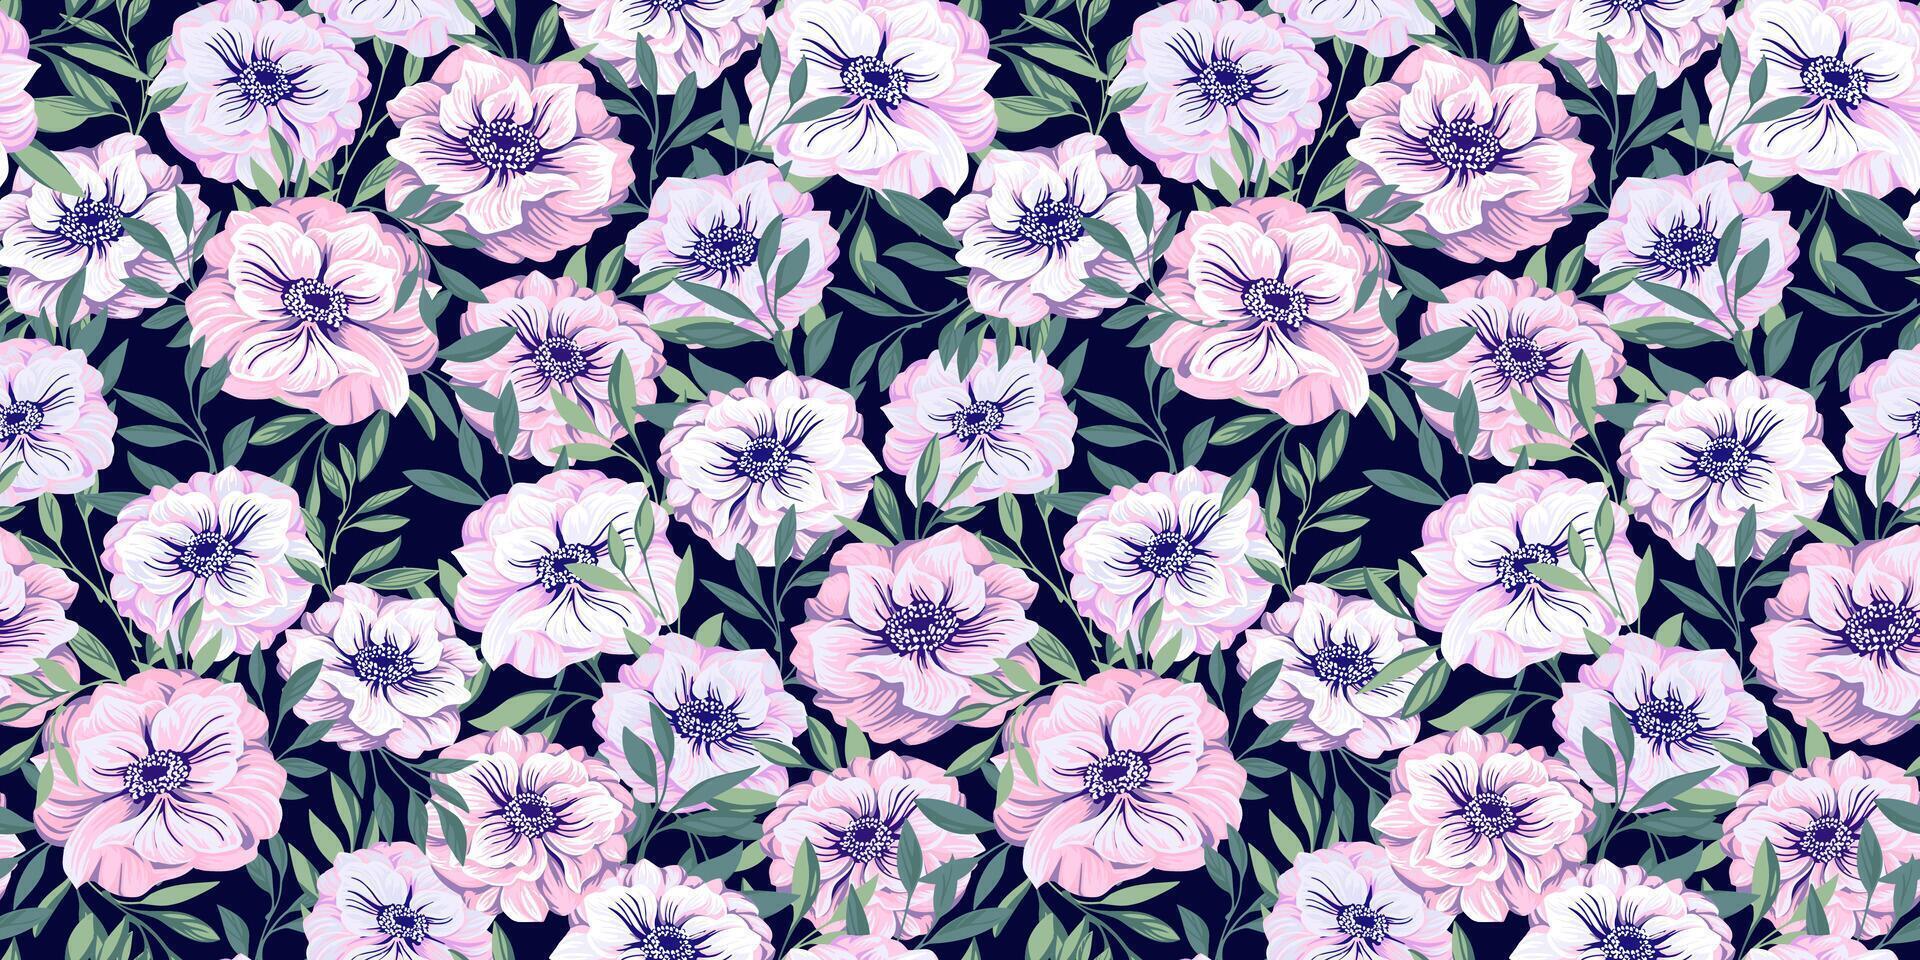 Blooming seamless pattern with Ranunculus, Trollius asiaticus, Globe flower. Purple floral vector drawn illustration on dark black background. Abstract, artistic flowers and branches leaves print